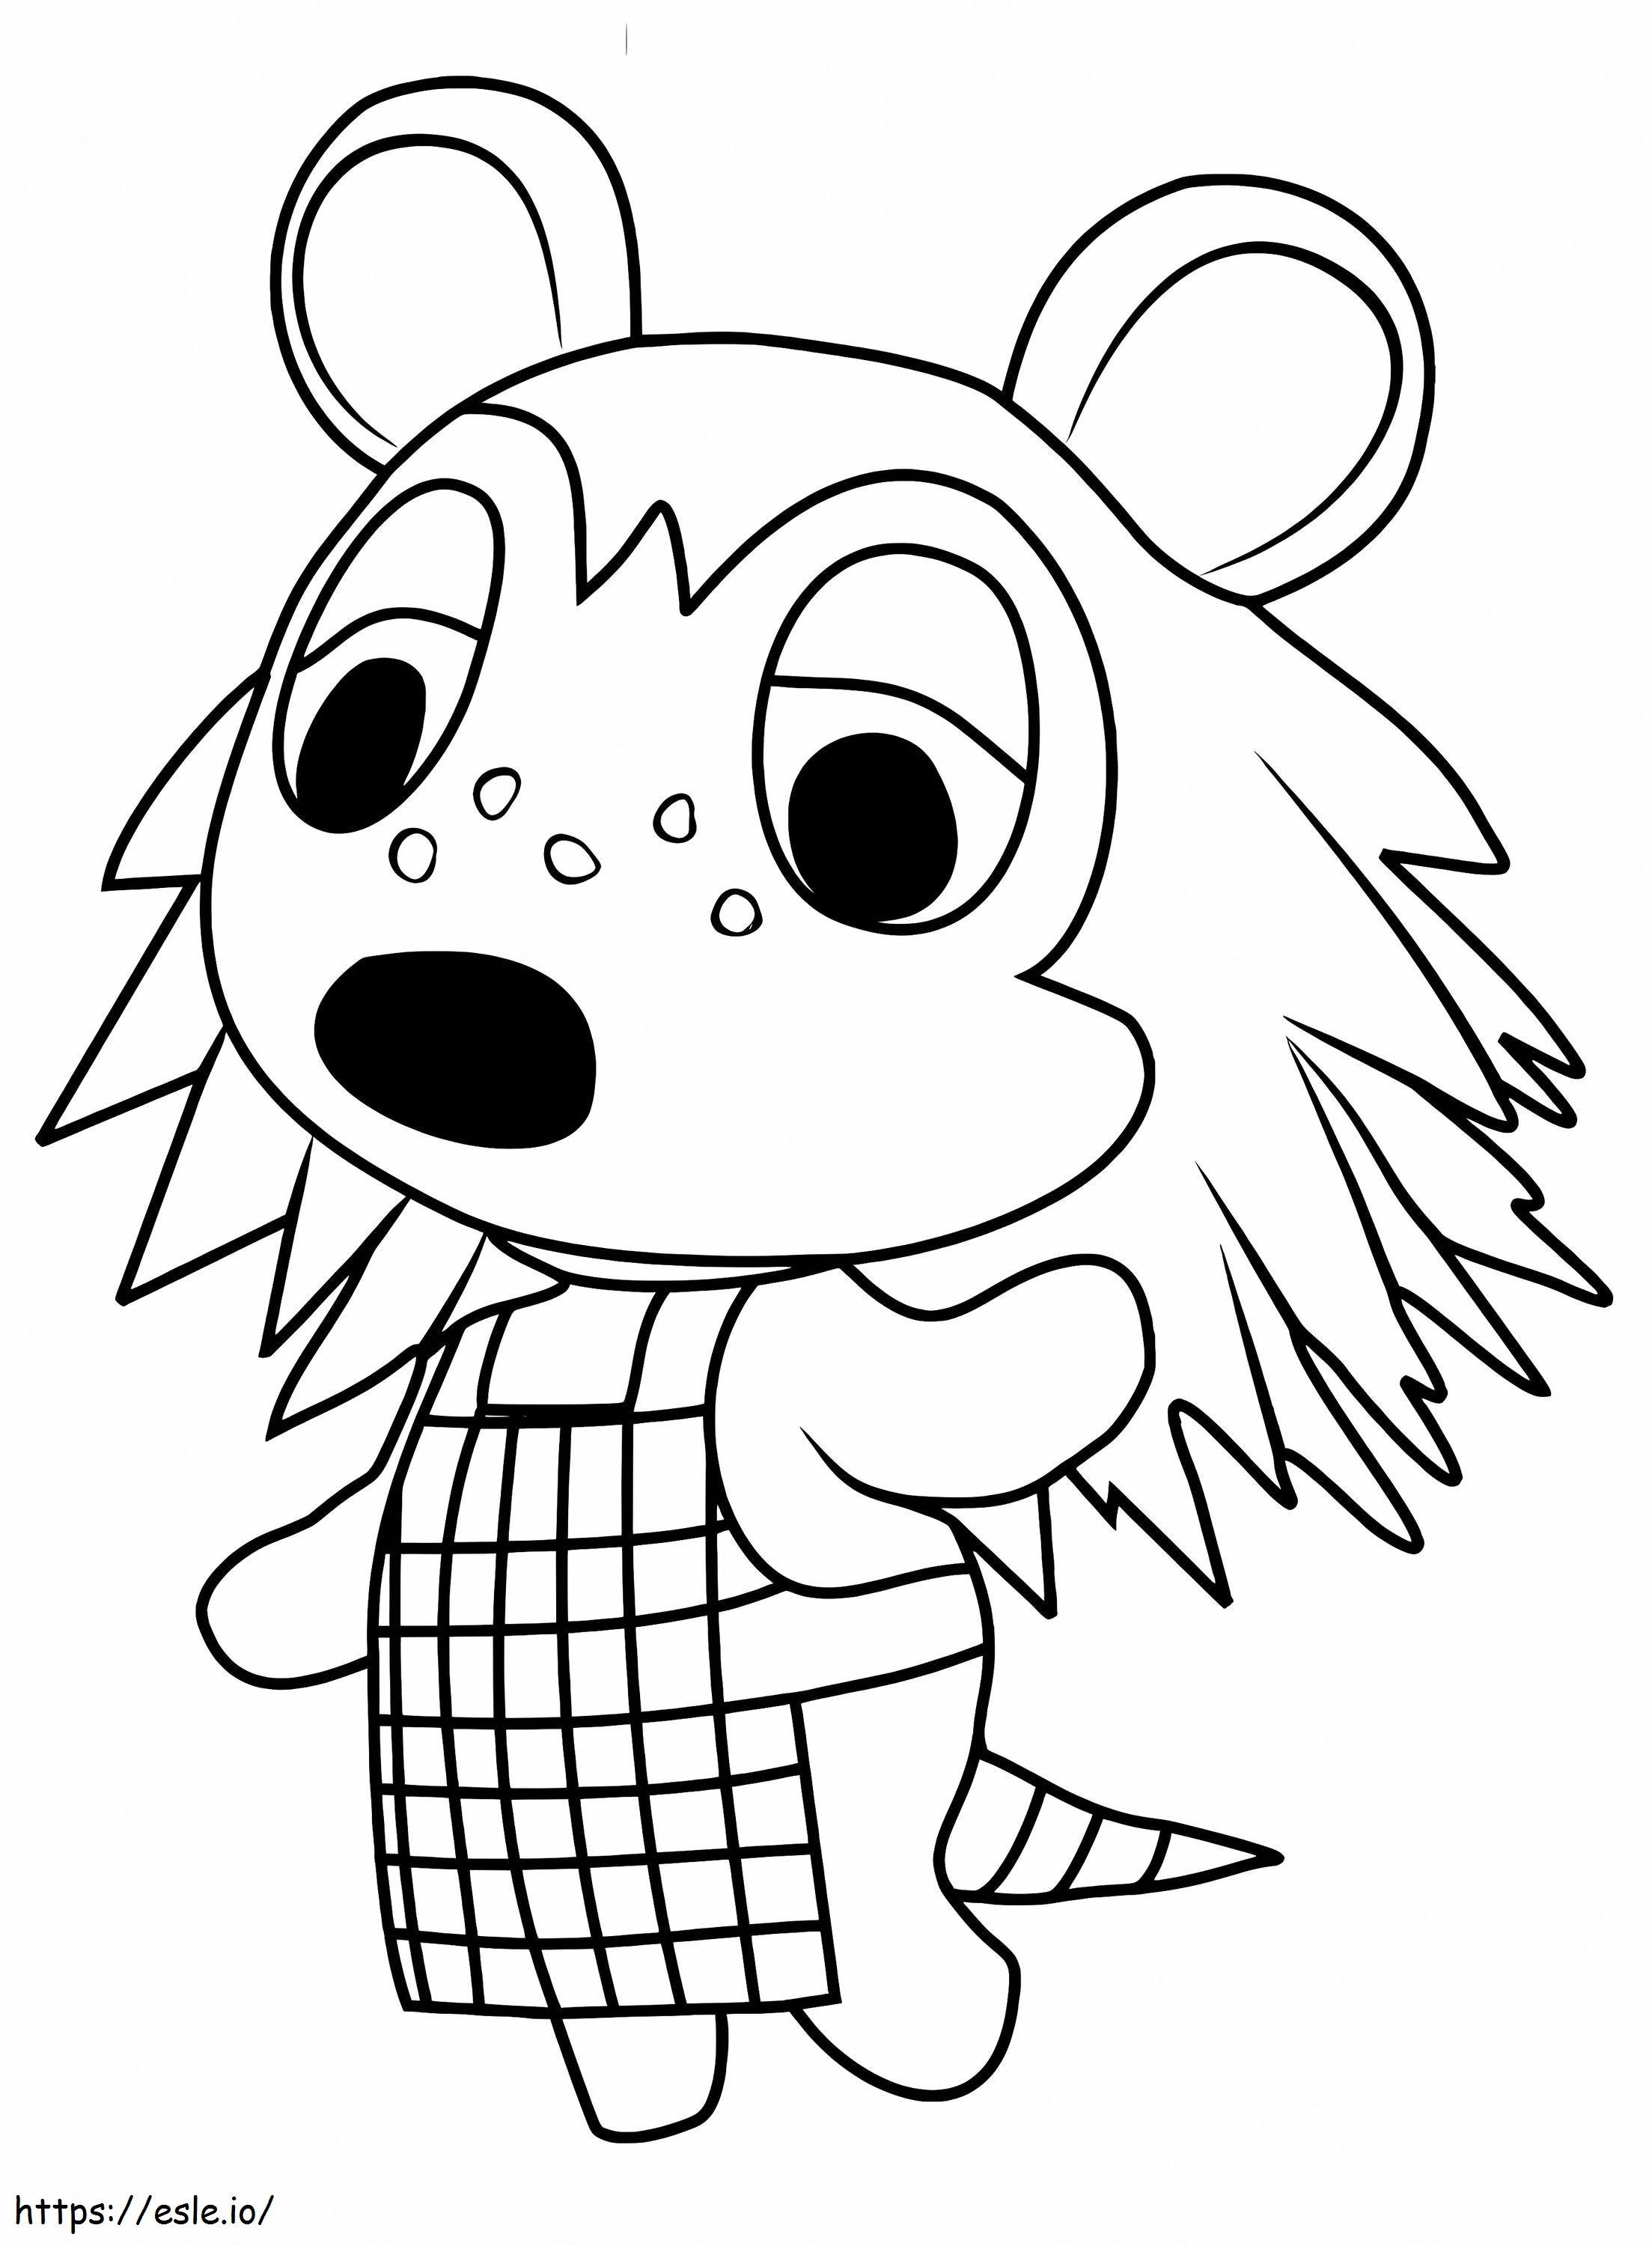 Sable From Animal Crossing coloring page